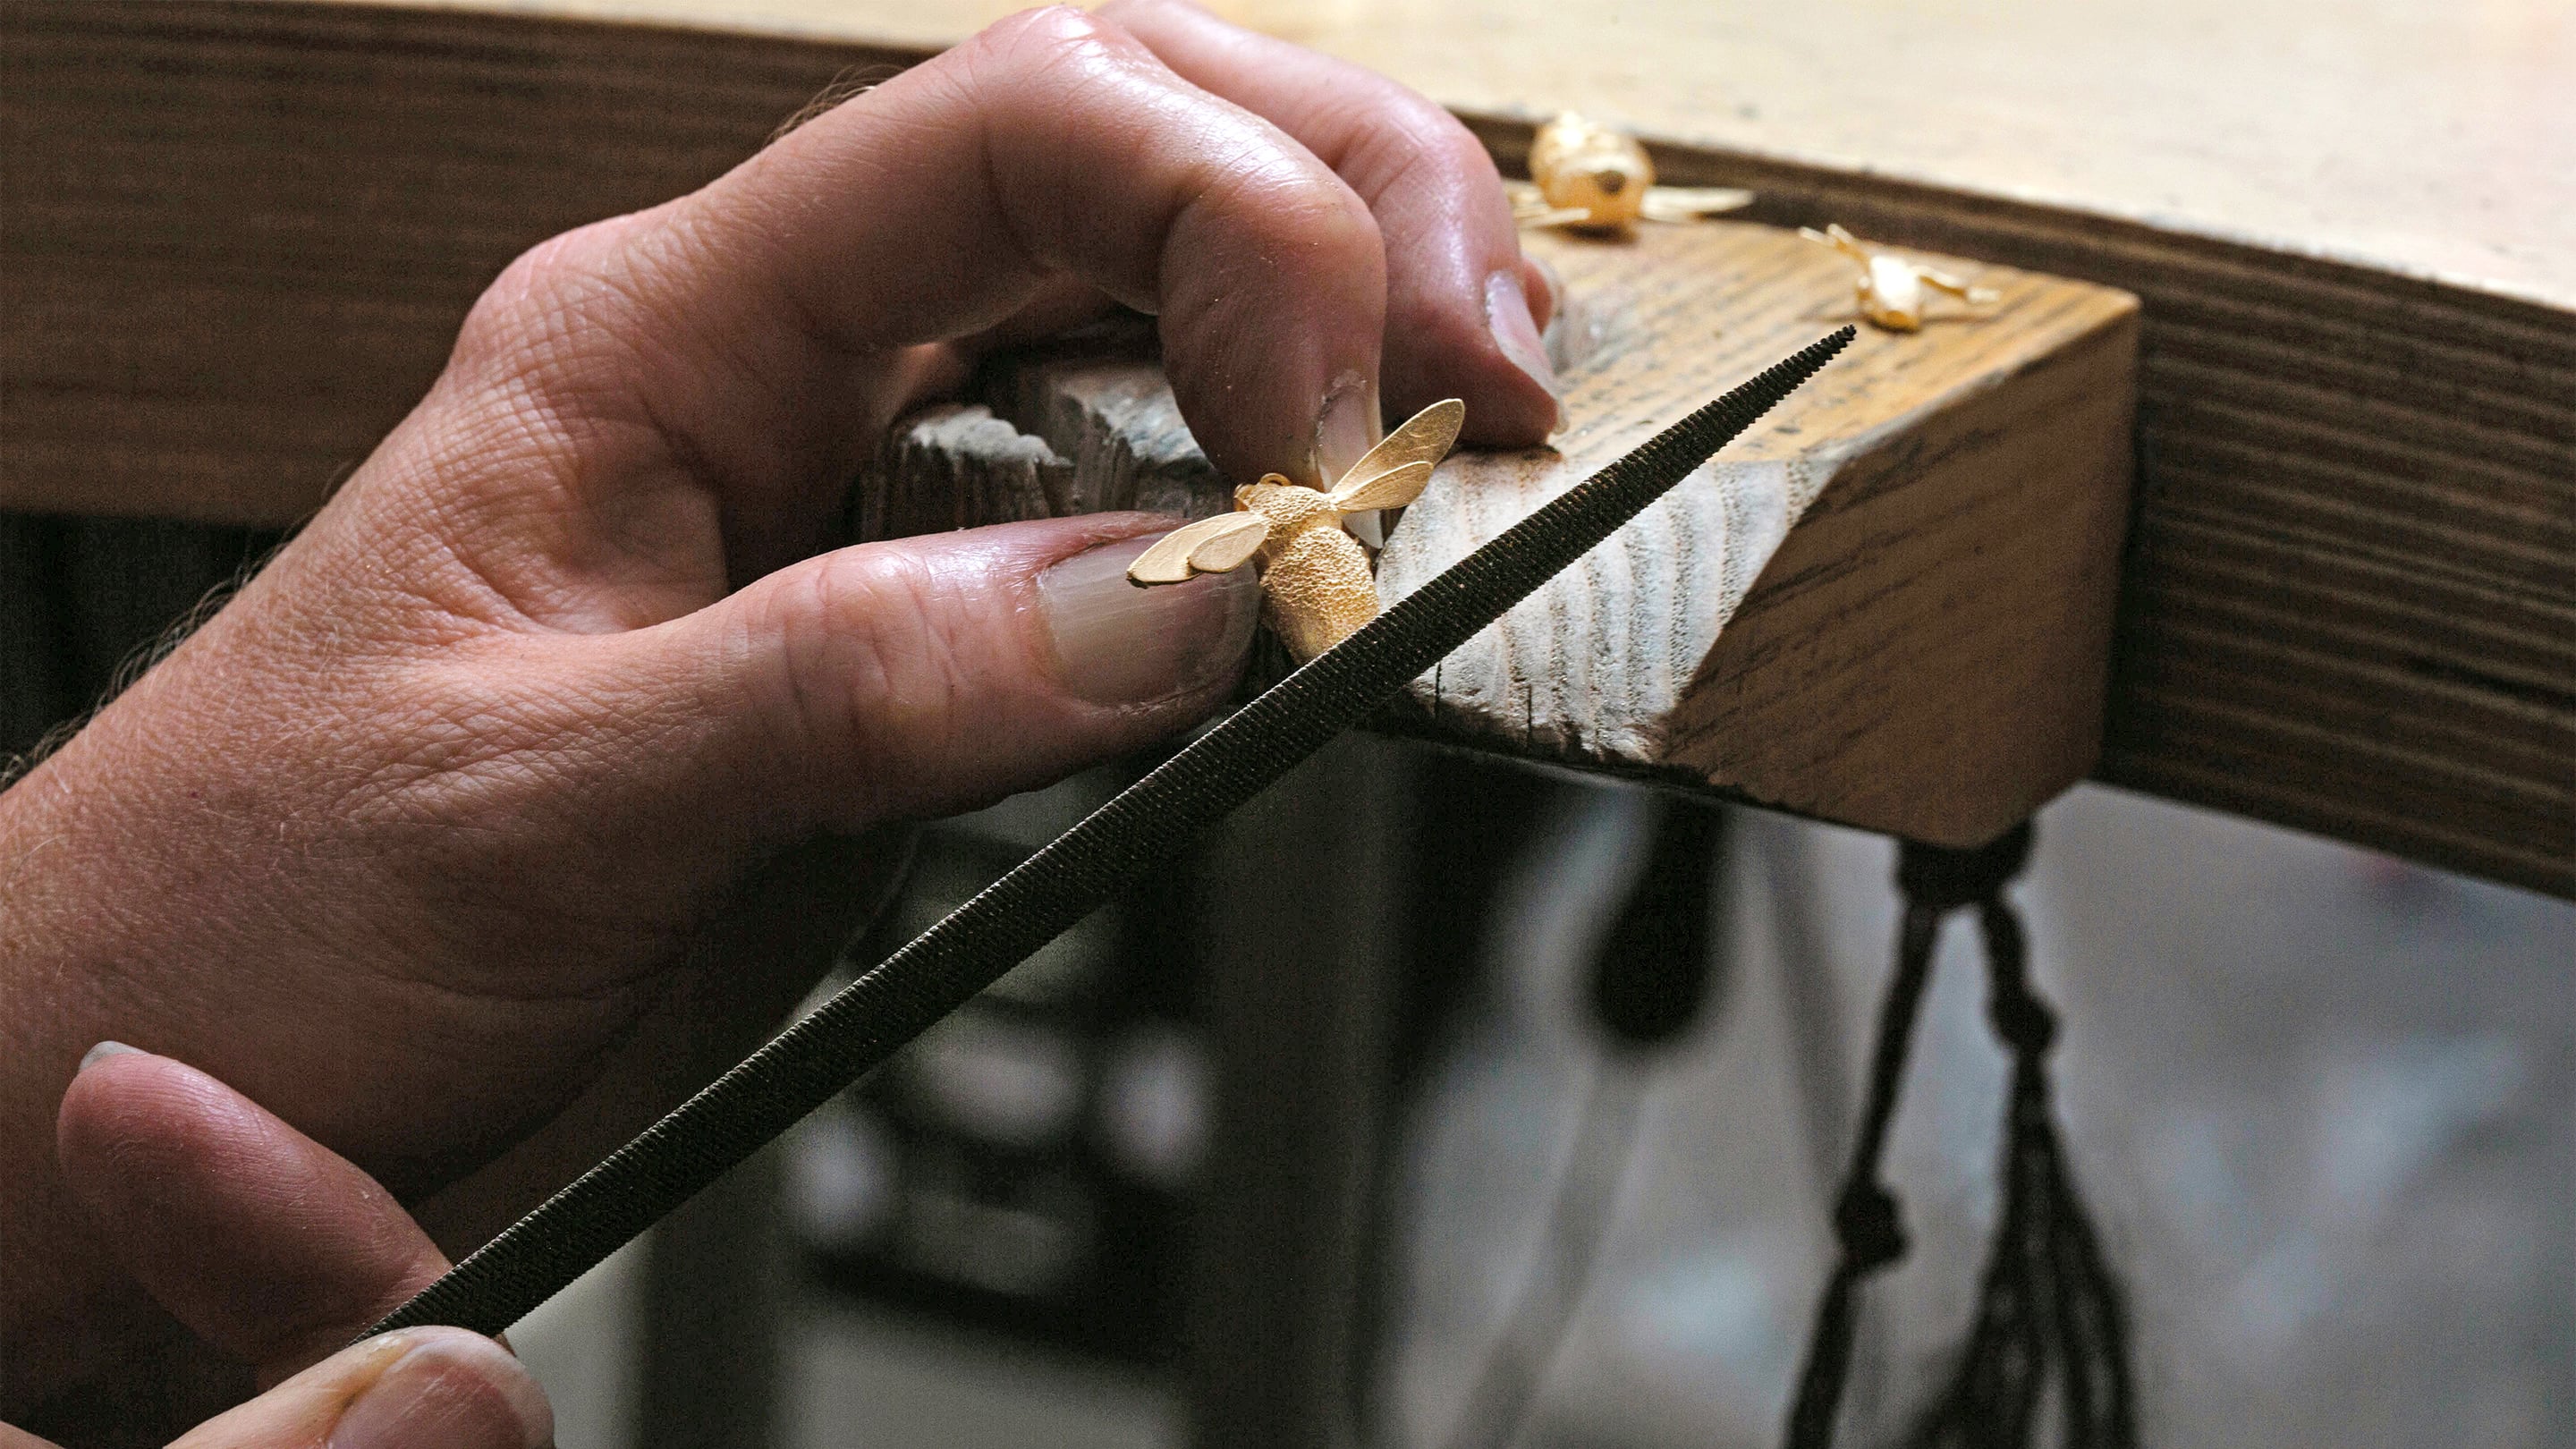 Jeweller in the workshop using a file to finish a bumblebee casting at the jewellers bench.